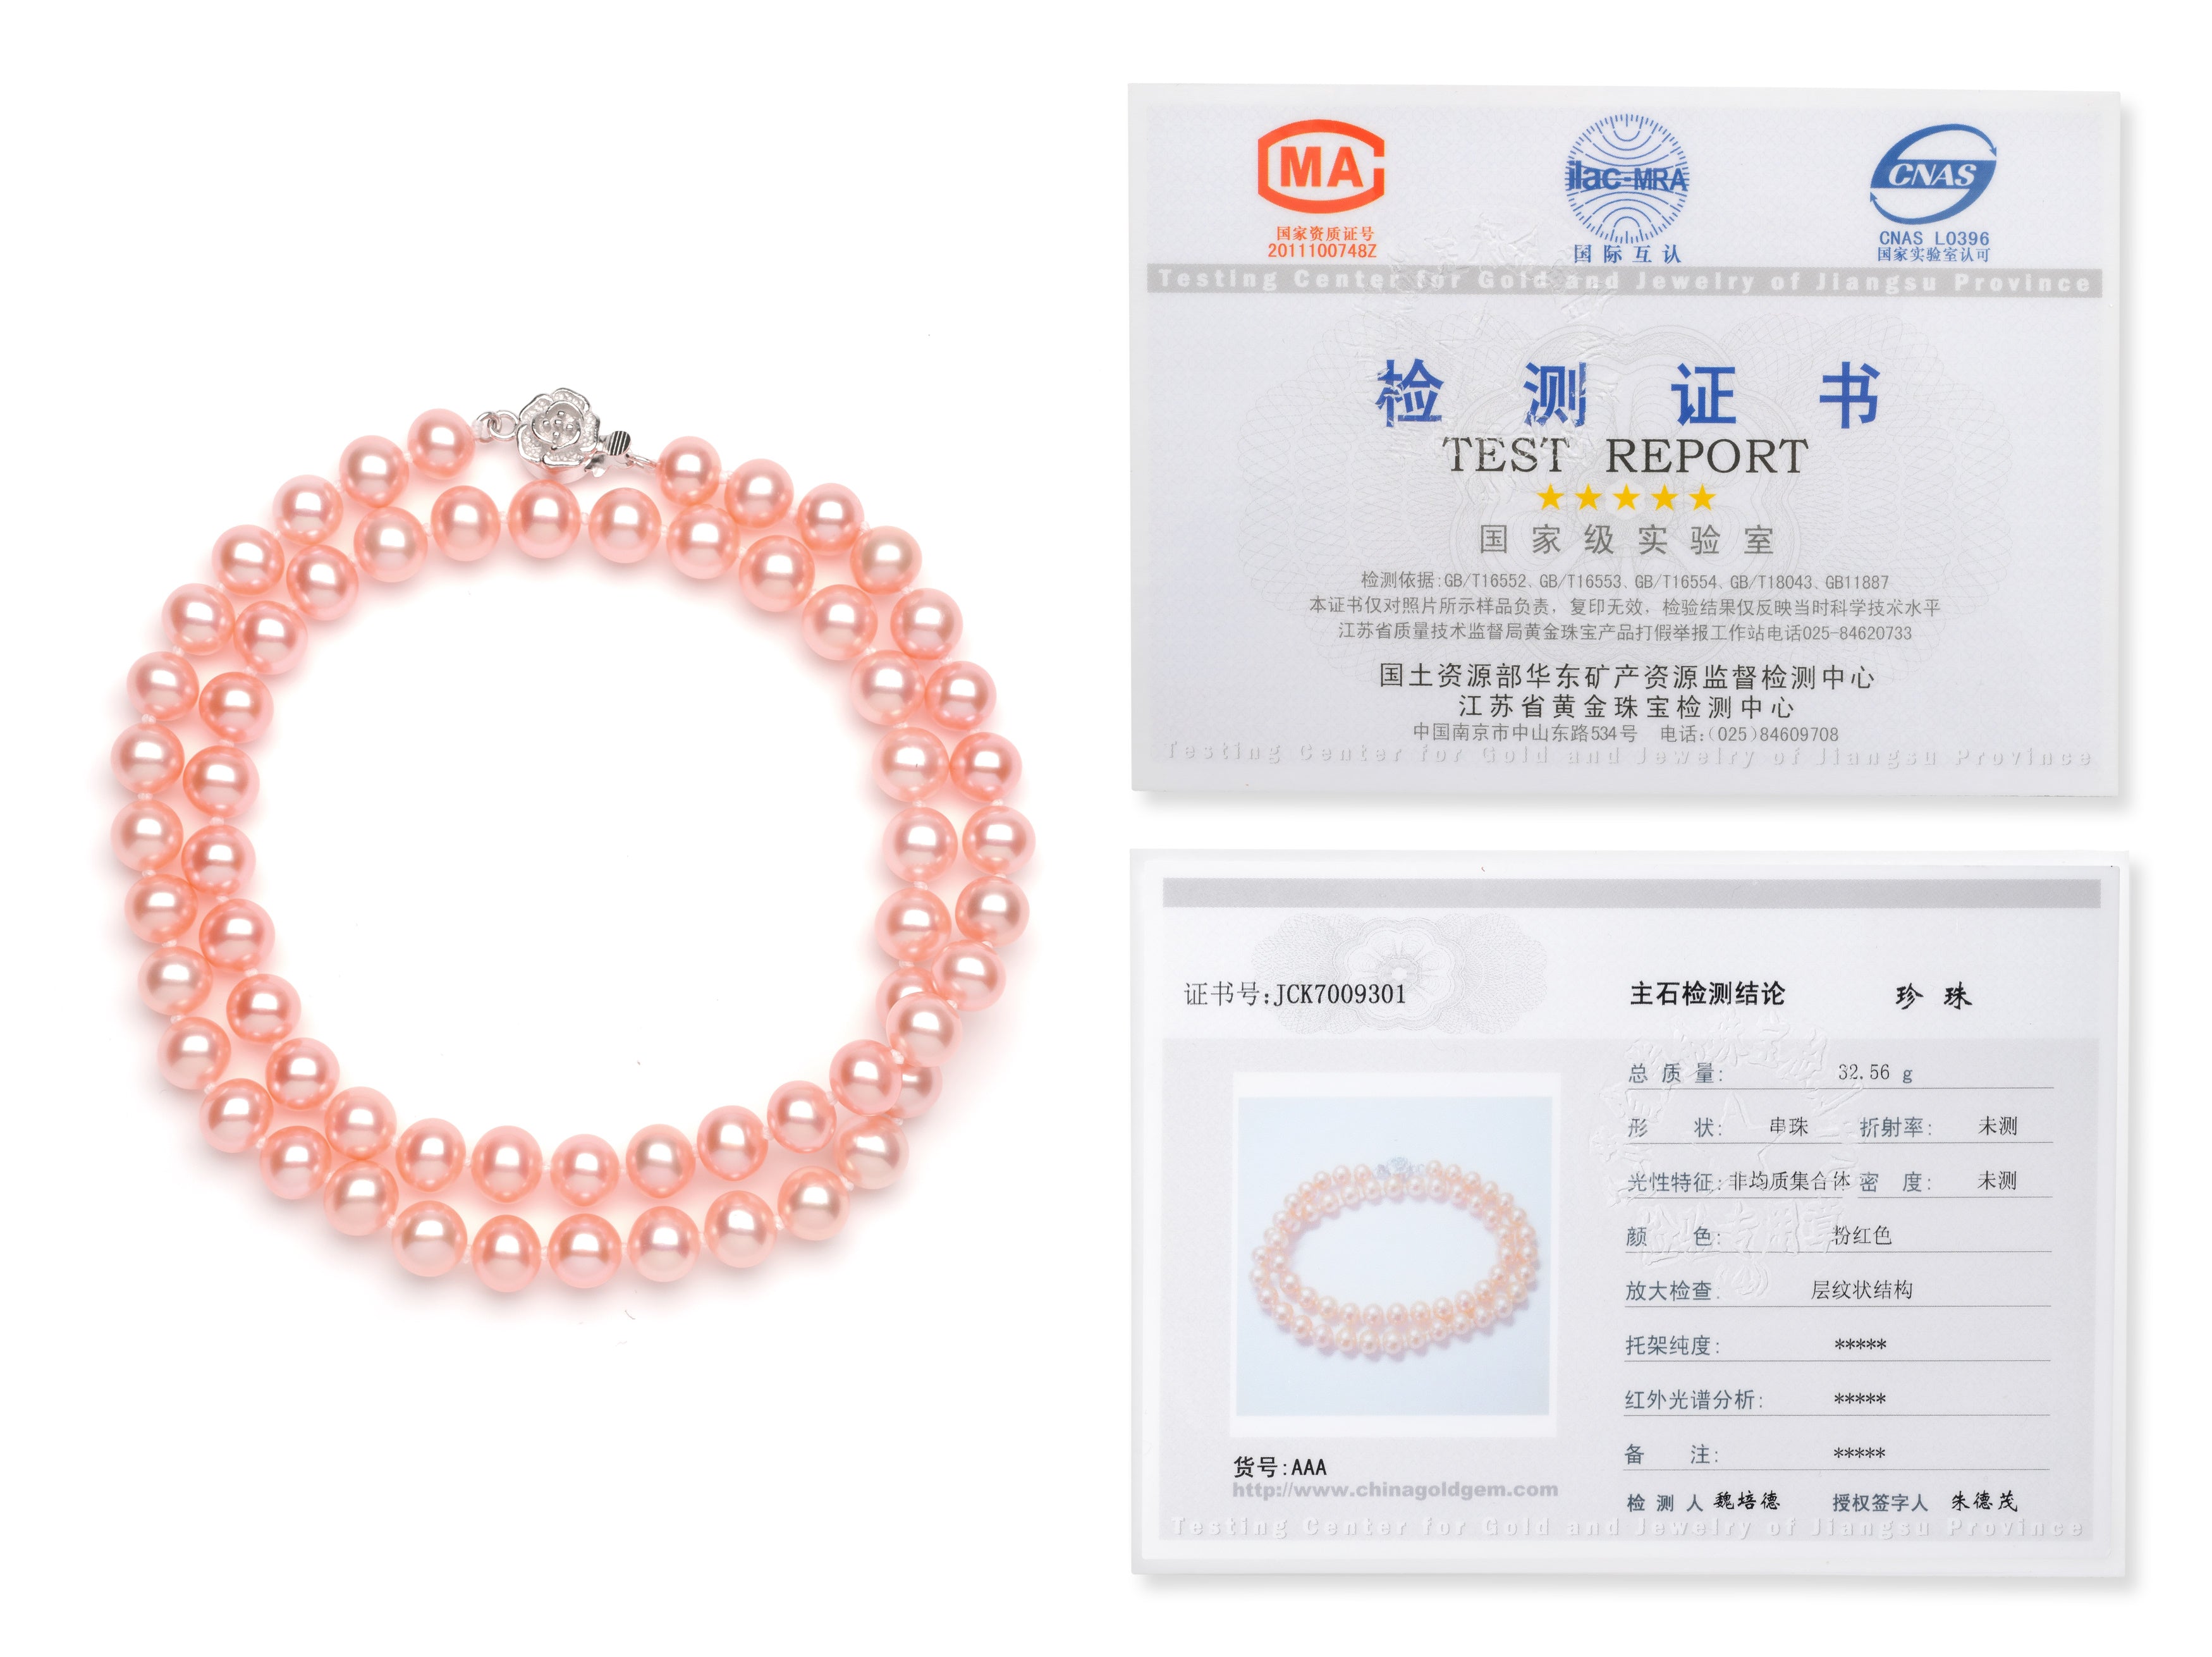 6.0-7.0 mm Pink Freshwater Pearl Necklace